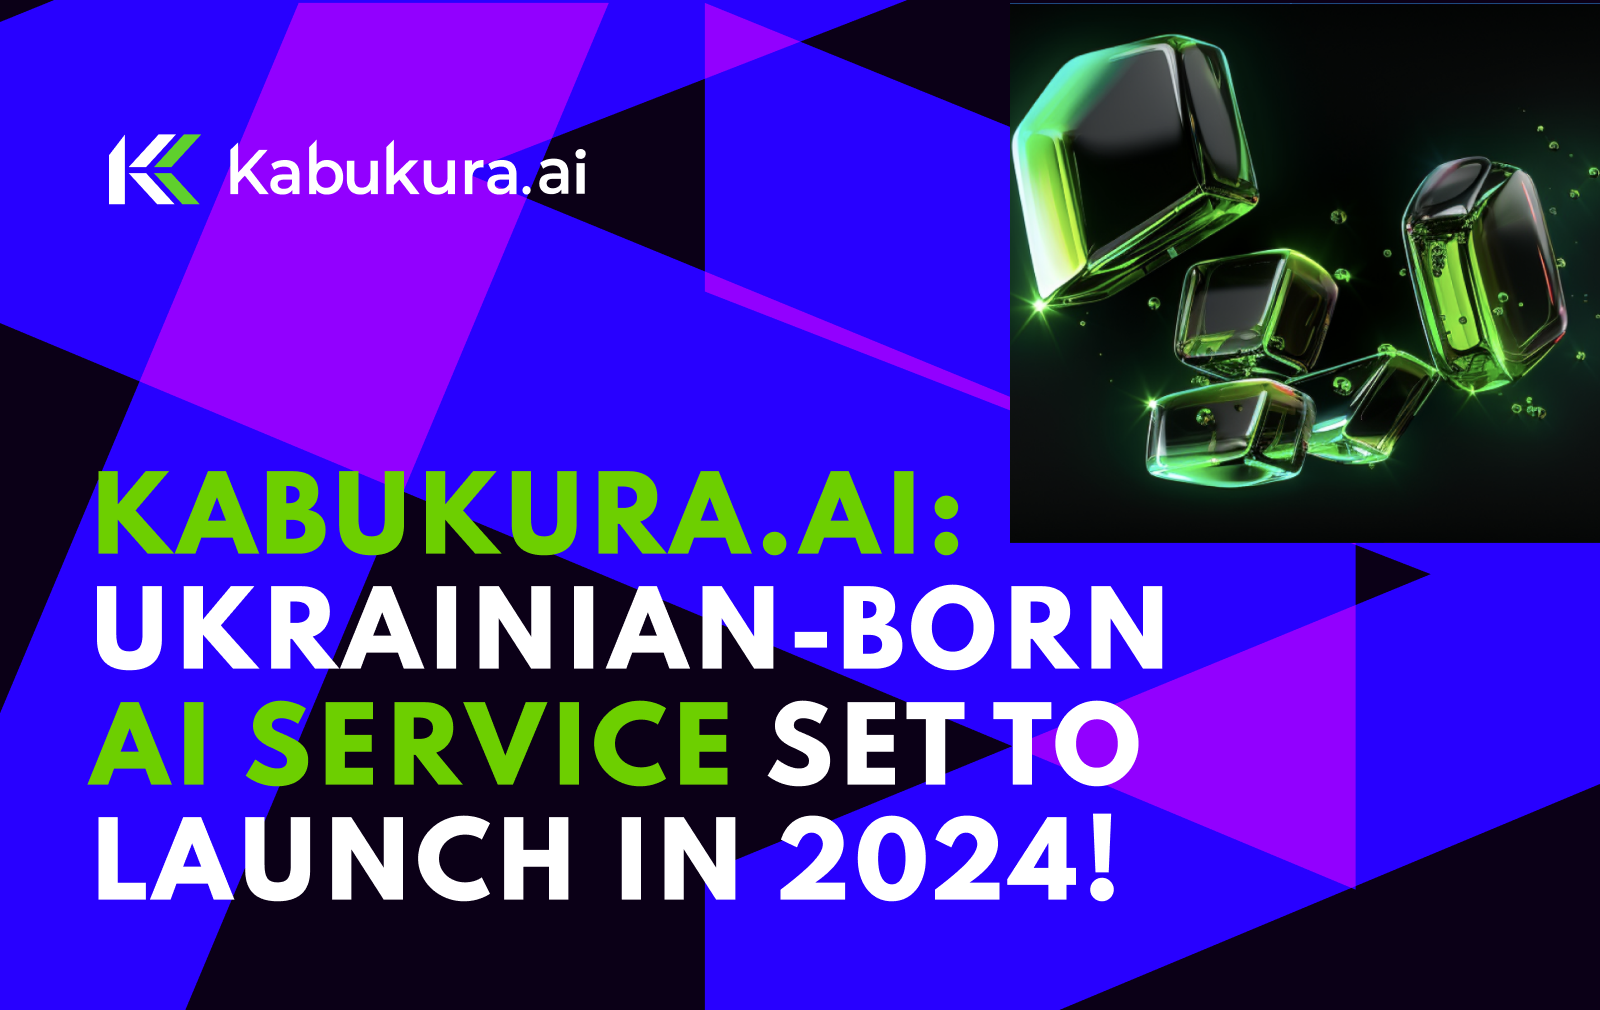 Developed in Ukraine, with all UI/UX design completed there, the AI service product Kabukura.ai is set to launch at the beginning of the New Year 2024! cover